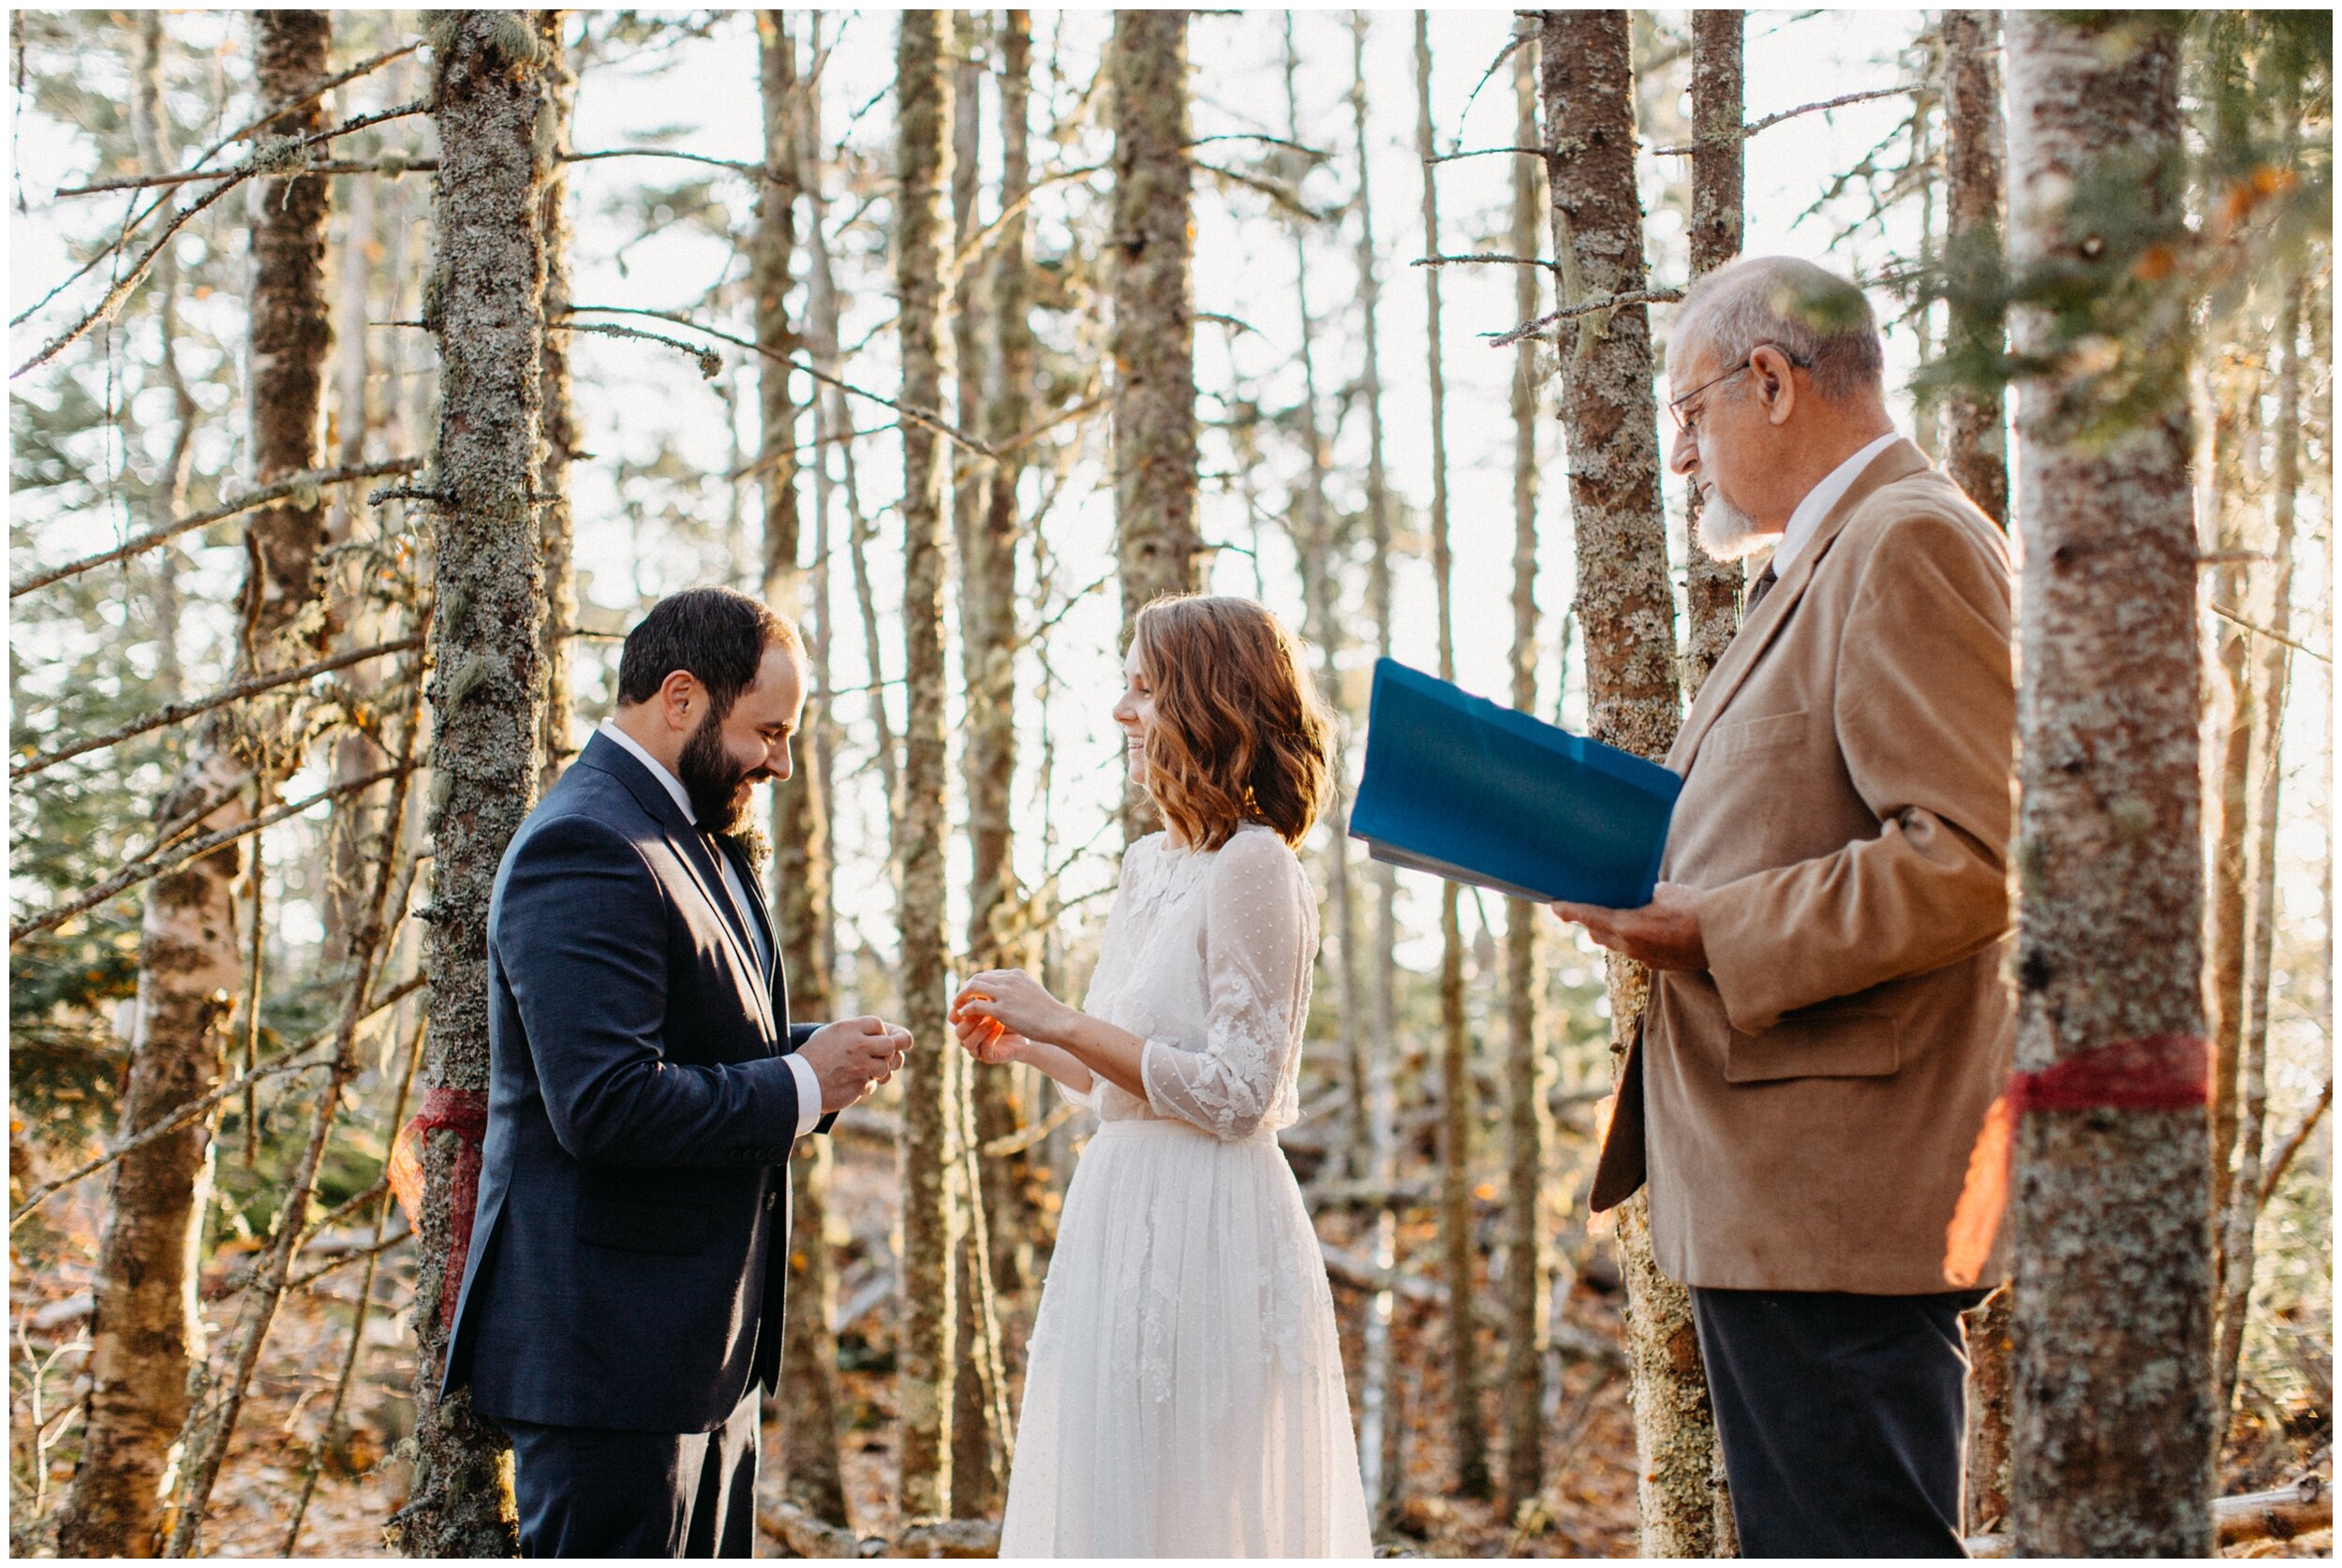 Intimate wedding ceremony in the woods on Artist Point in Grand Marais, Minnesota during sunset